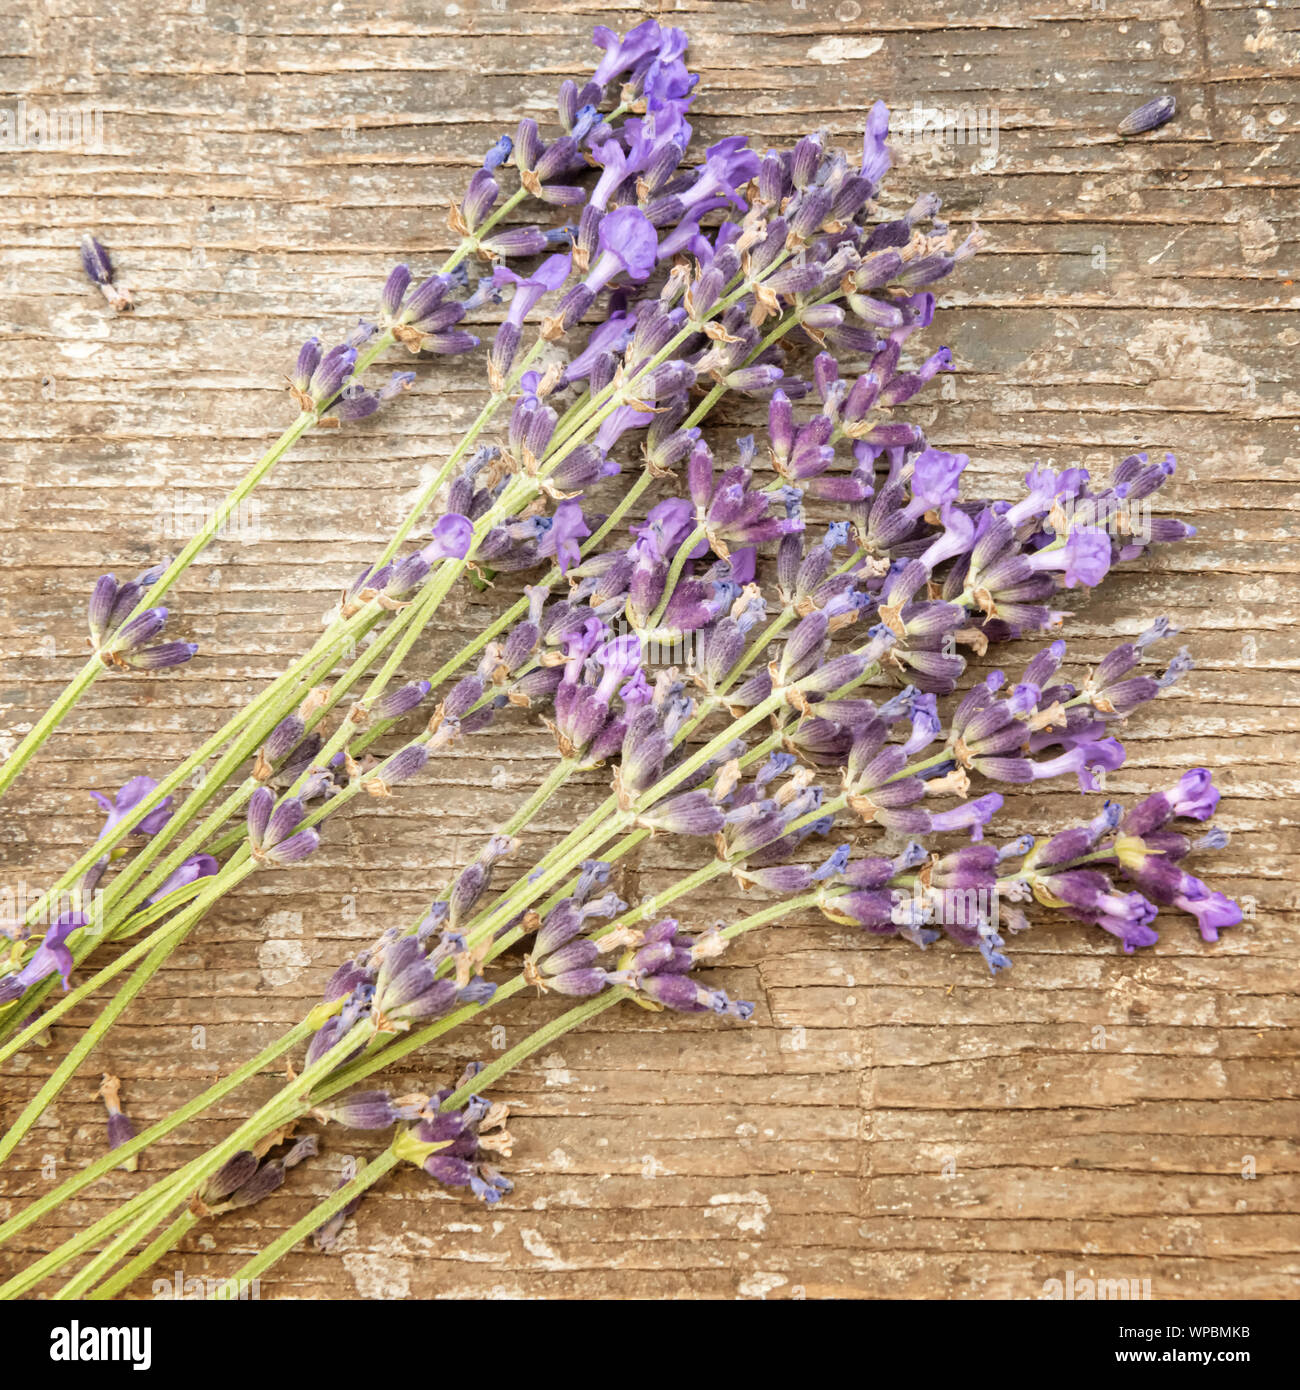 Square image in rustic style with close up of small bunch of beautiful fresh lavender flowers on old rough textured natural wooden table surface. View Stock Photo